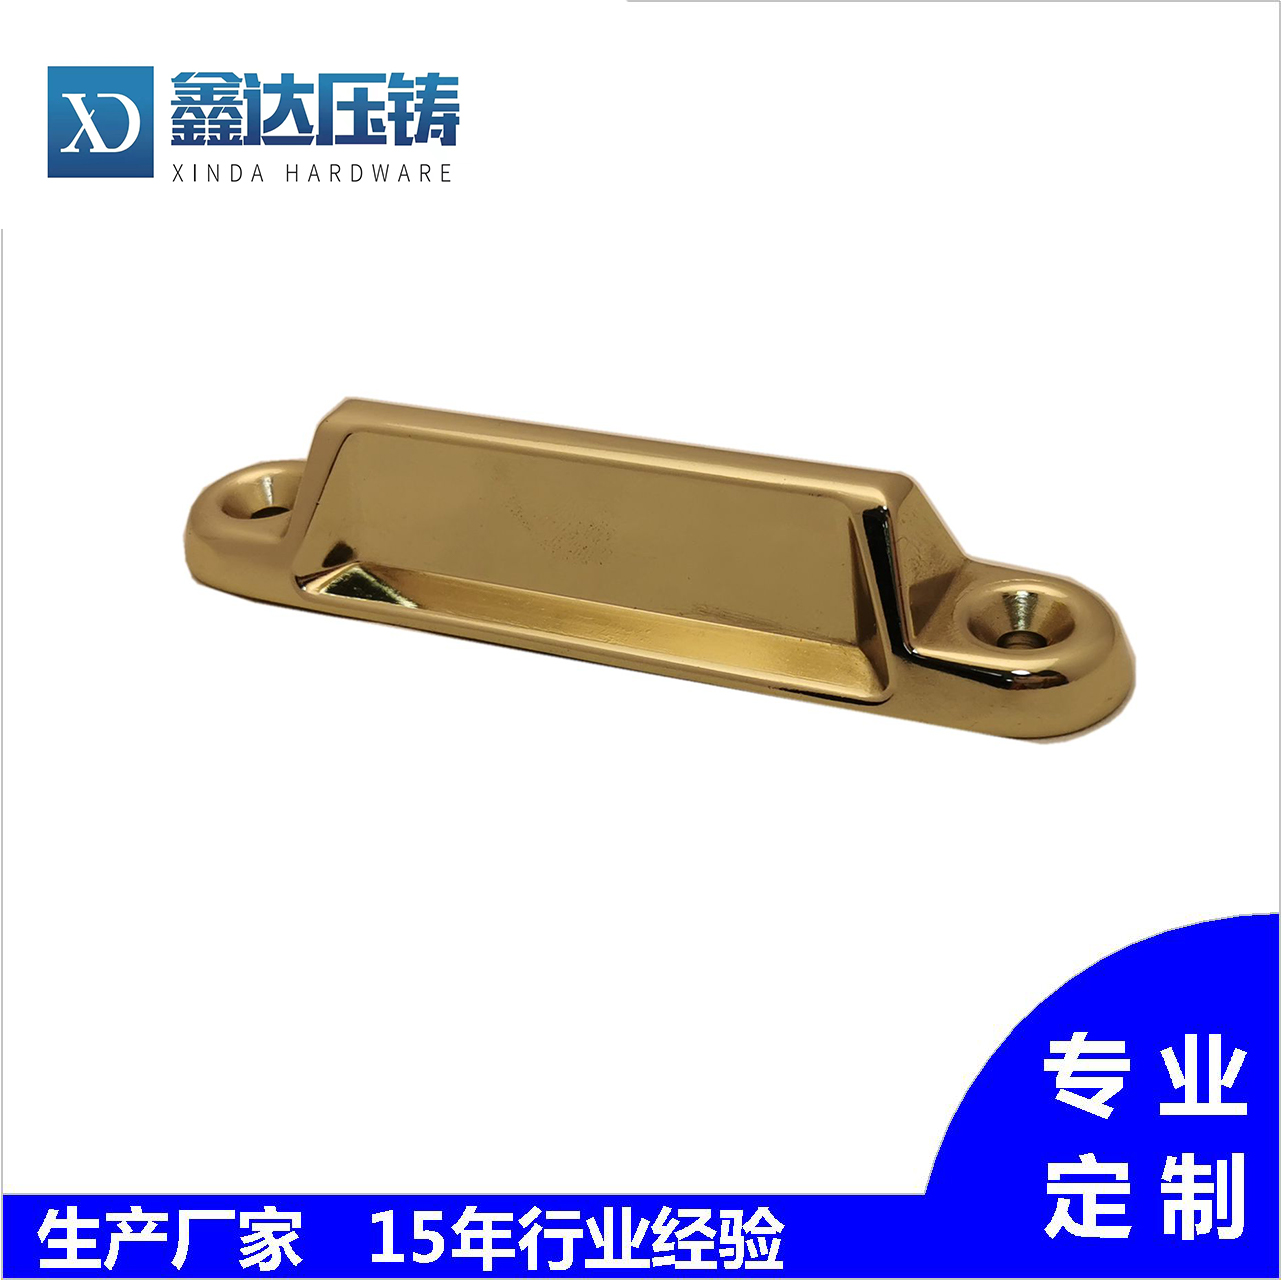 Manufacturers provide samples and drawings to customize various clothing accessories, zinc alloy accessories, and die castings